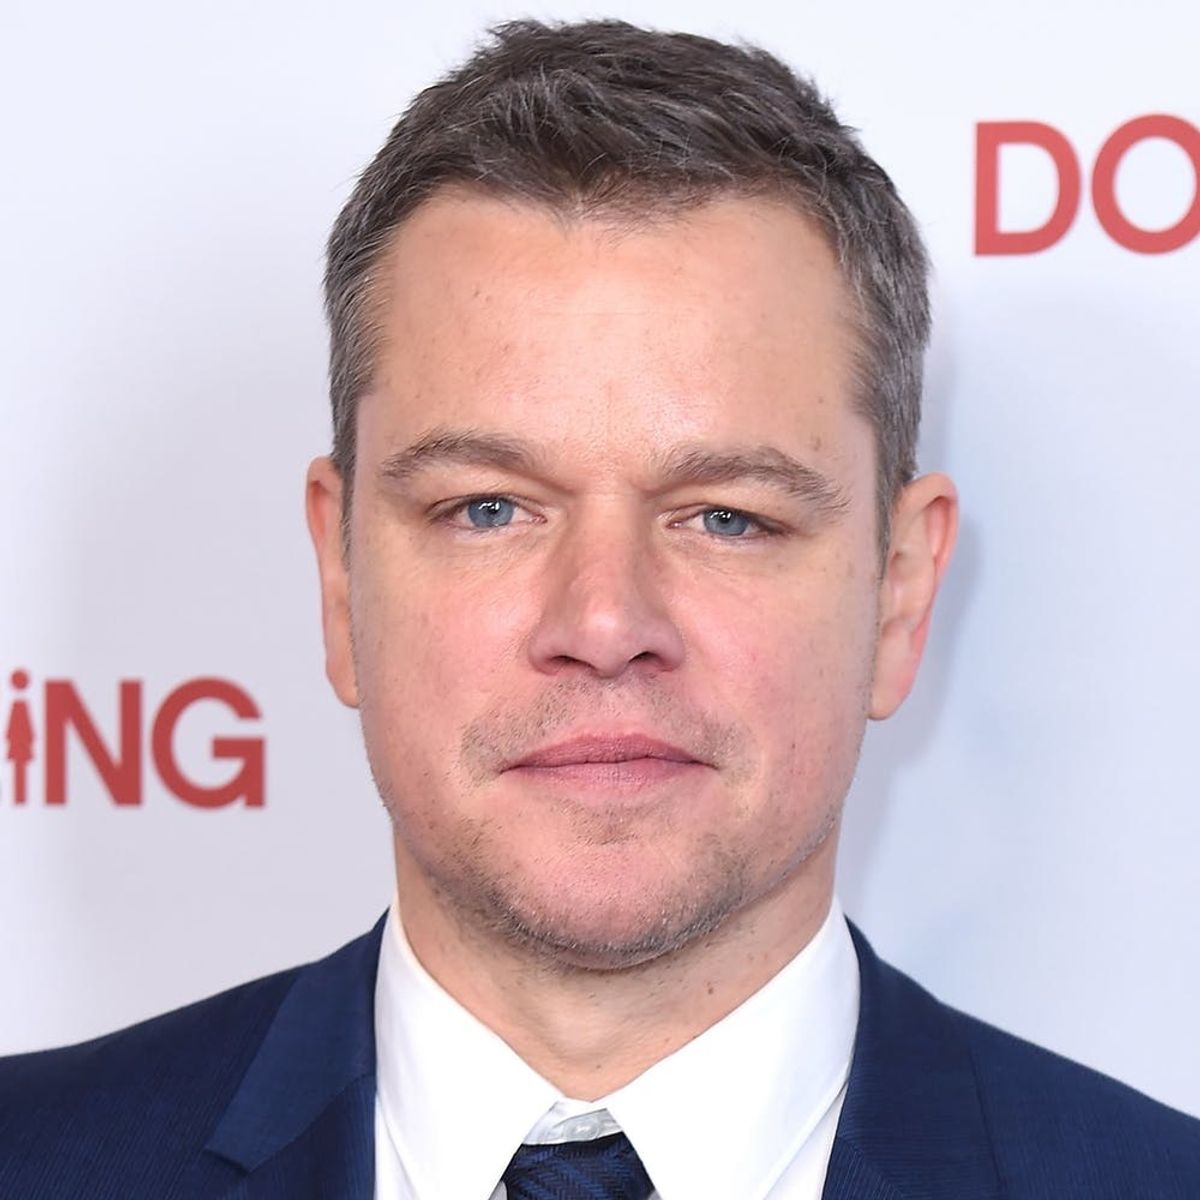 More Than 25,000 People Have Signed a Petition to Have Matt Damon Cut from ‘Ocean’s 8’